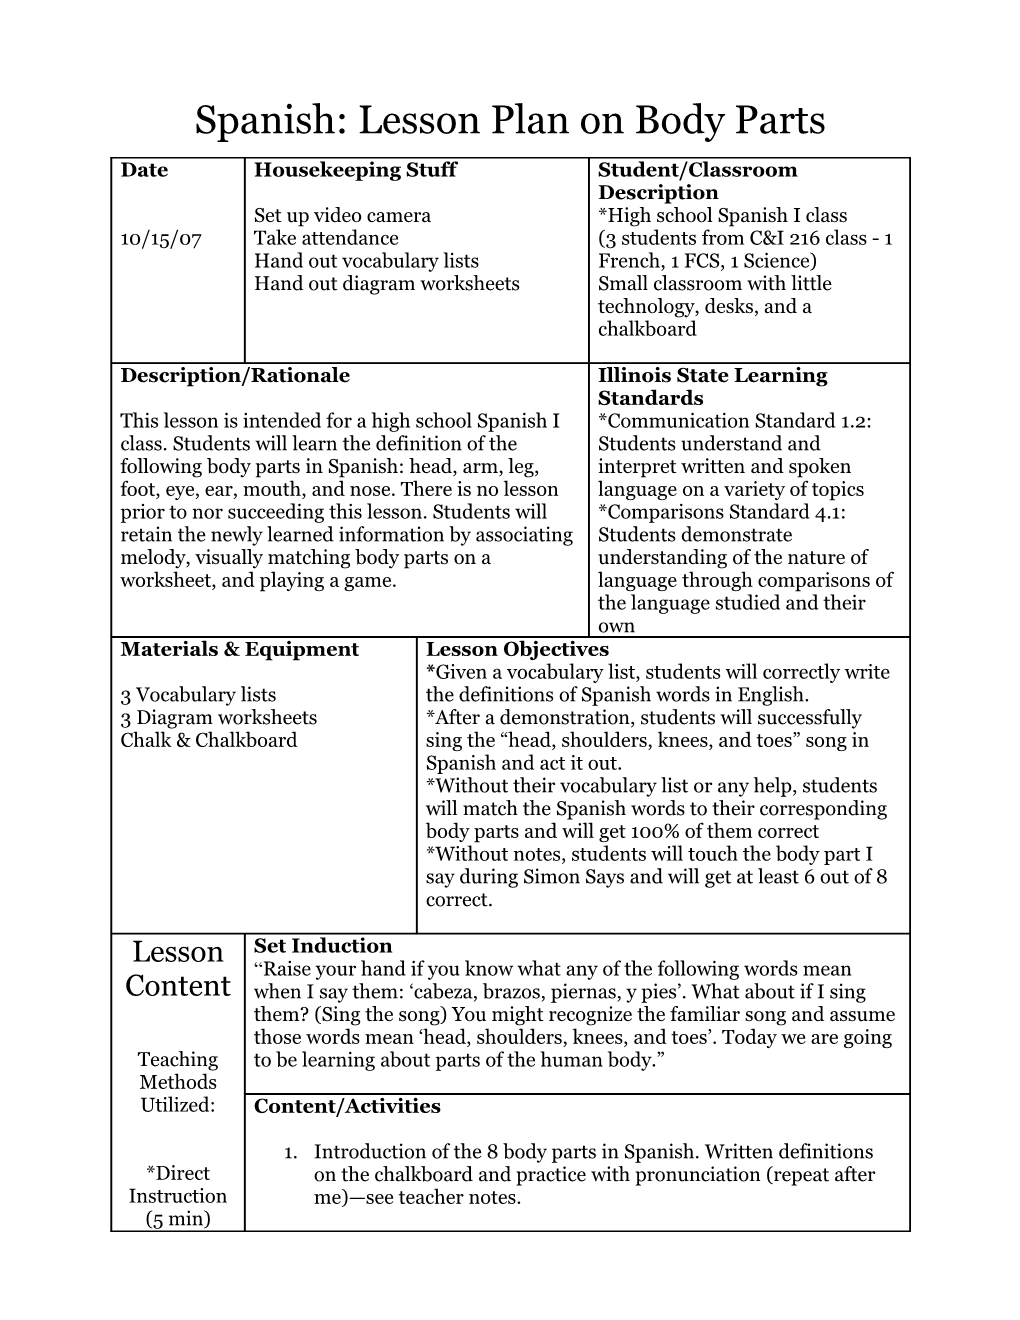 Lesson Plan Template s2